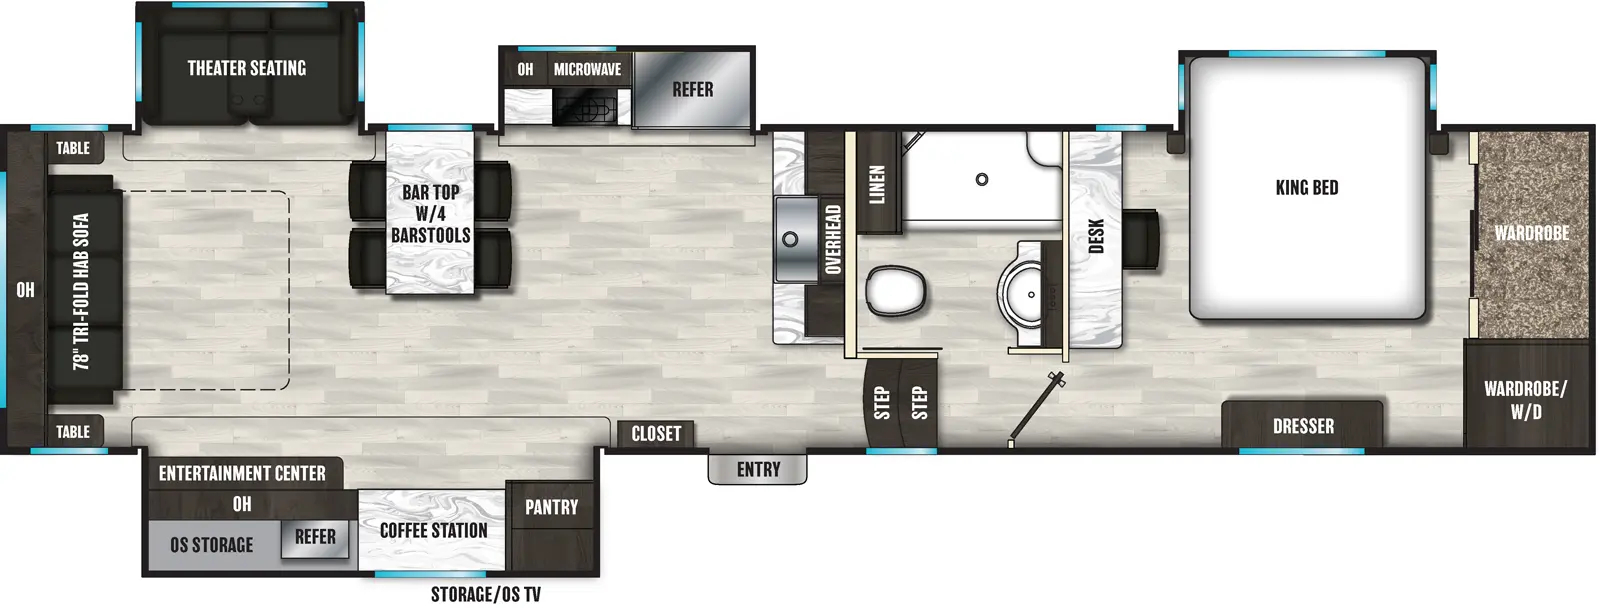 The 352RLD has four slideouts and one entry. Exterior features include refrigerator, overhead cabinet, storage and TV. Interior layout front to back: wardrobe with washer/dryer, off-door side king bed slideout, door side dresser, and desk along inner wall; off-door side full bathroom with linen cabinet; two steps down to entry and closet; kitchen counter with sink and overhead cabinet along inner wall; off-door side slideout with refrigerator, microwave, overhead cabinet and cooktop; door side slideout with pantry, coffee station, and entertainment center; off-door side bar top with four bar stools; off-door side theater seating slideout; rear tri-fold hide-a-bed sofa with overhead cabinet and tables on each side. Optional king bed available in place of queen bed.